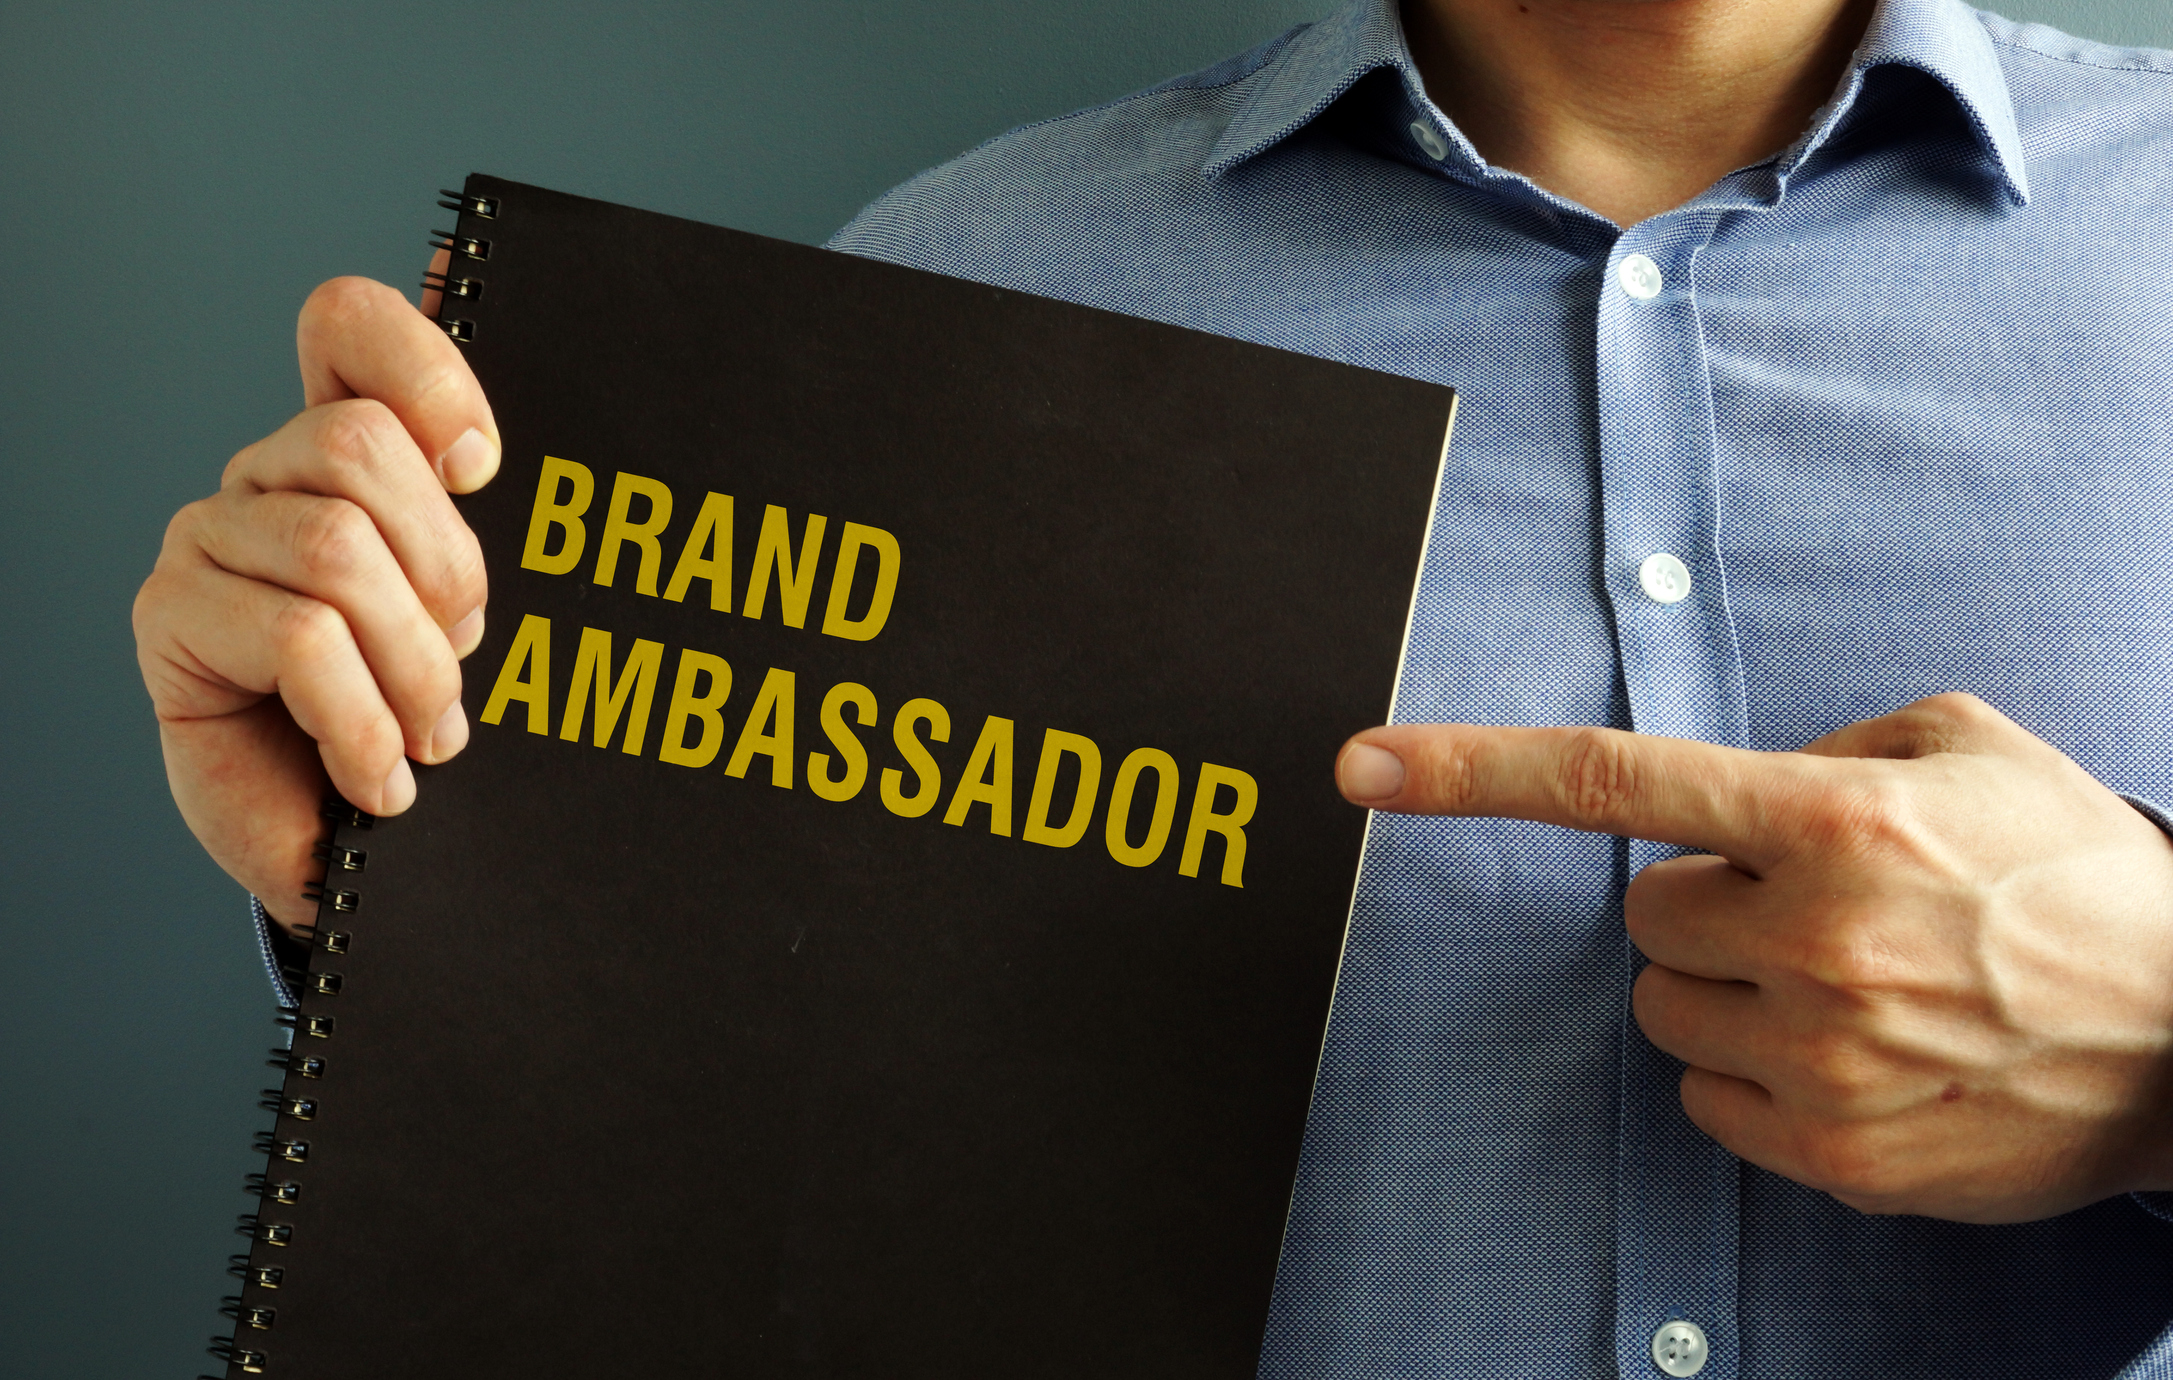 Geek insider, geekinsider, geekinsider. Com,, the impact of brand ambassadors on your business, business